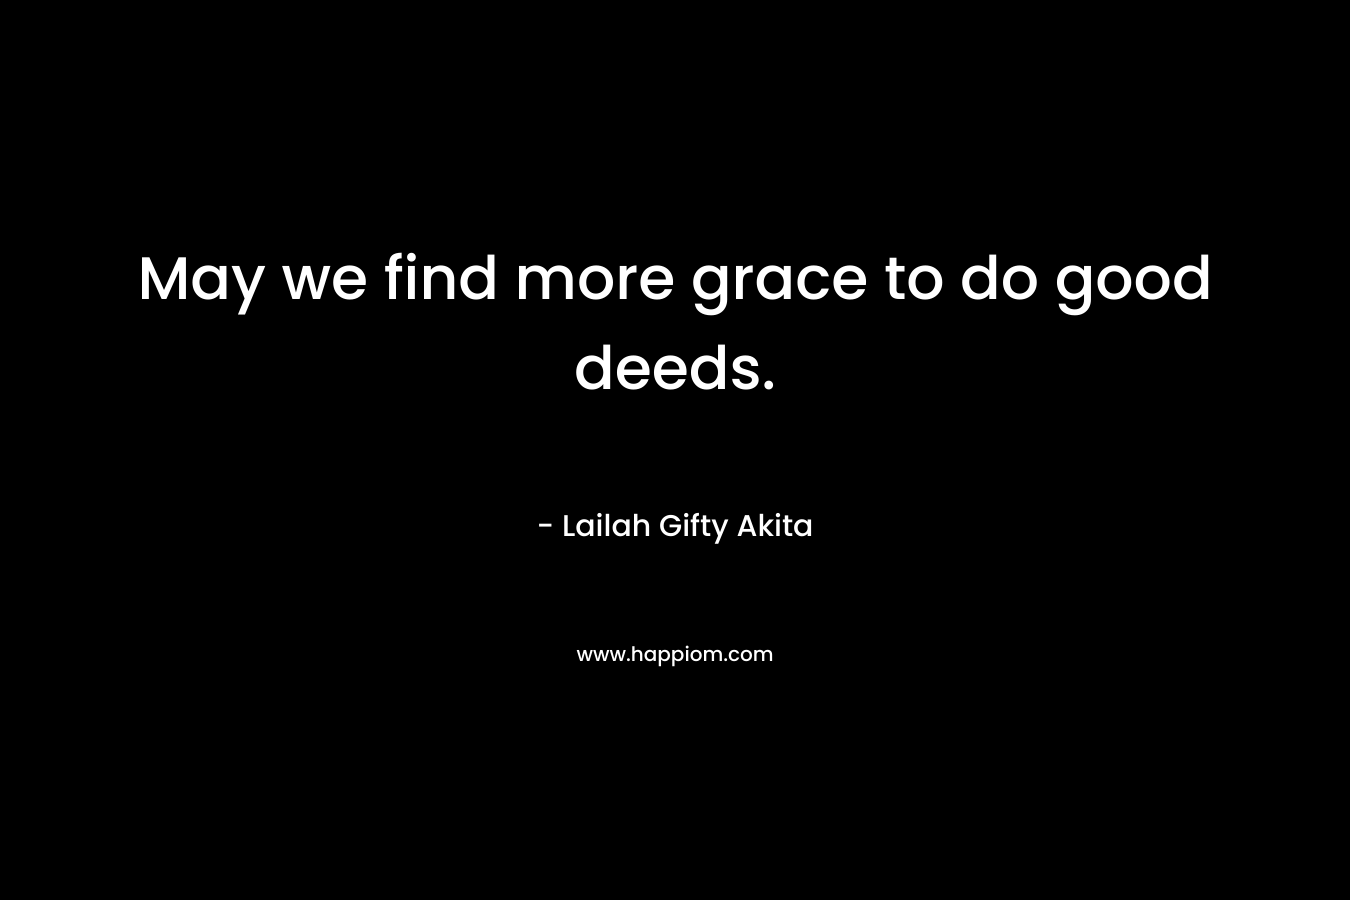 May we find more grace to do good deeds.